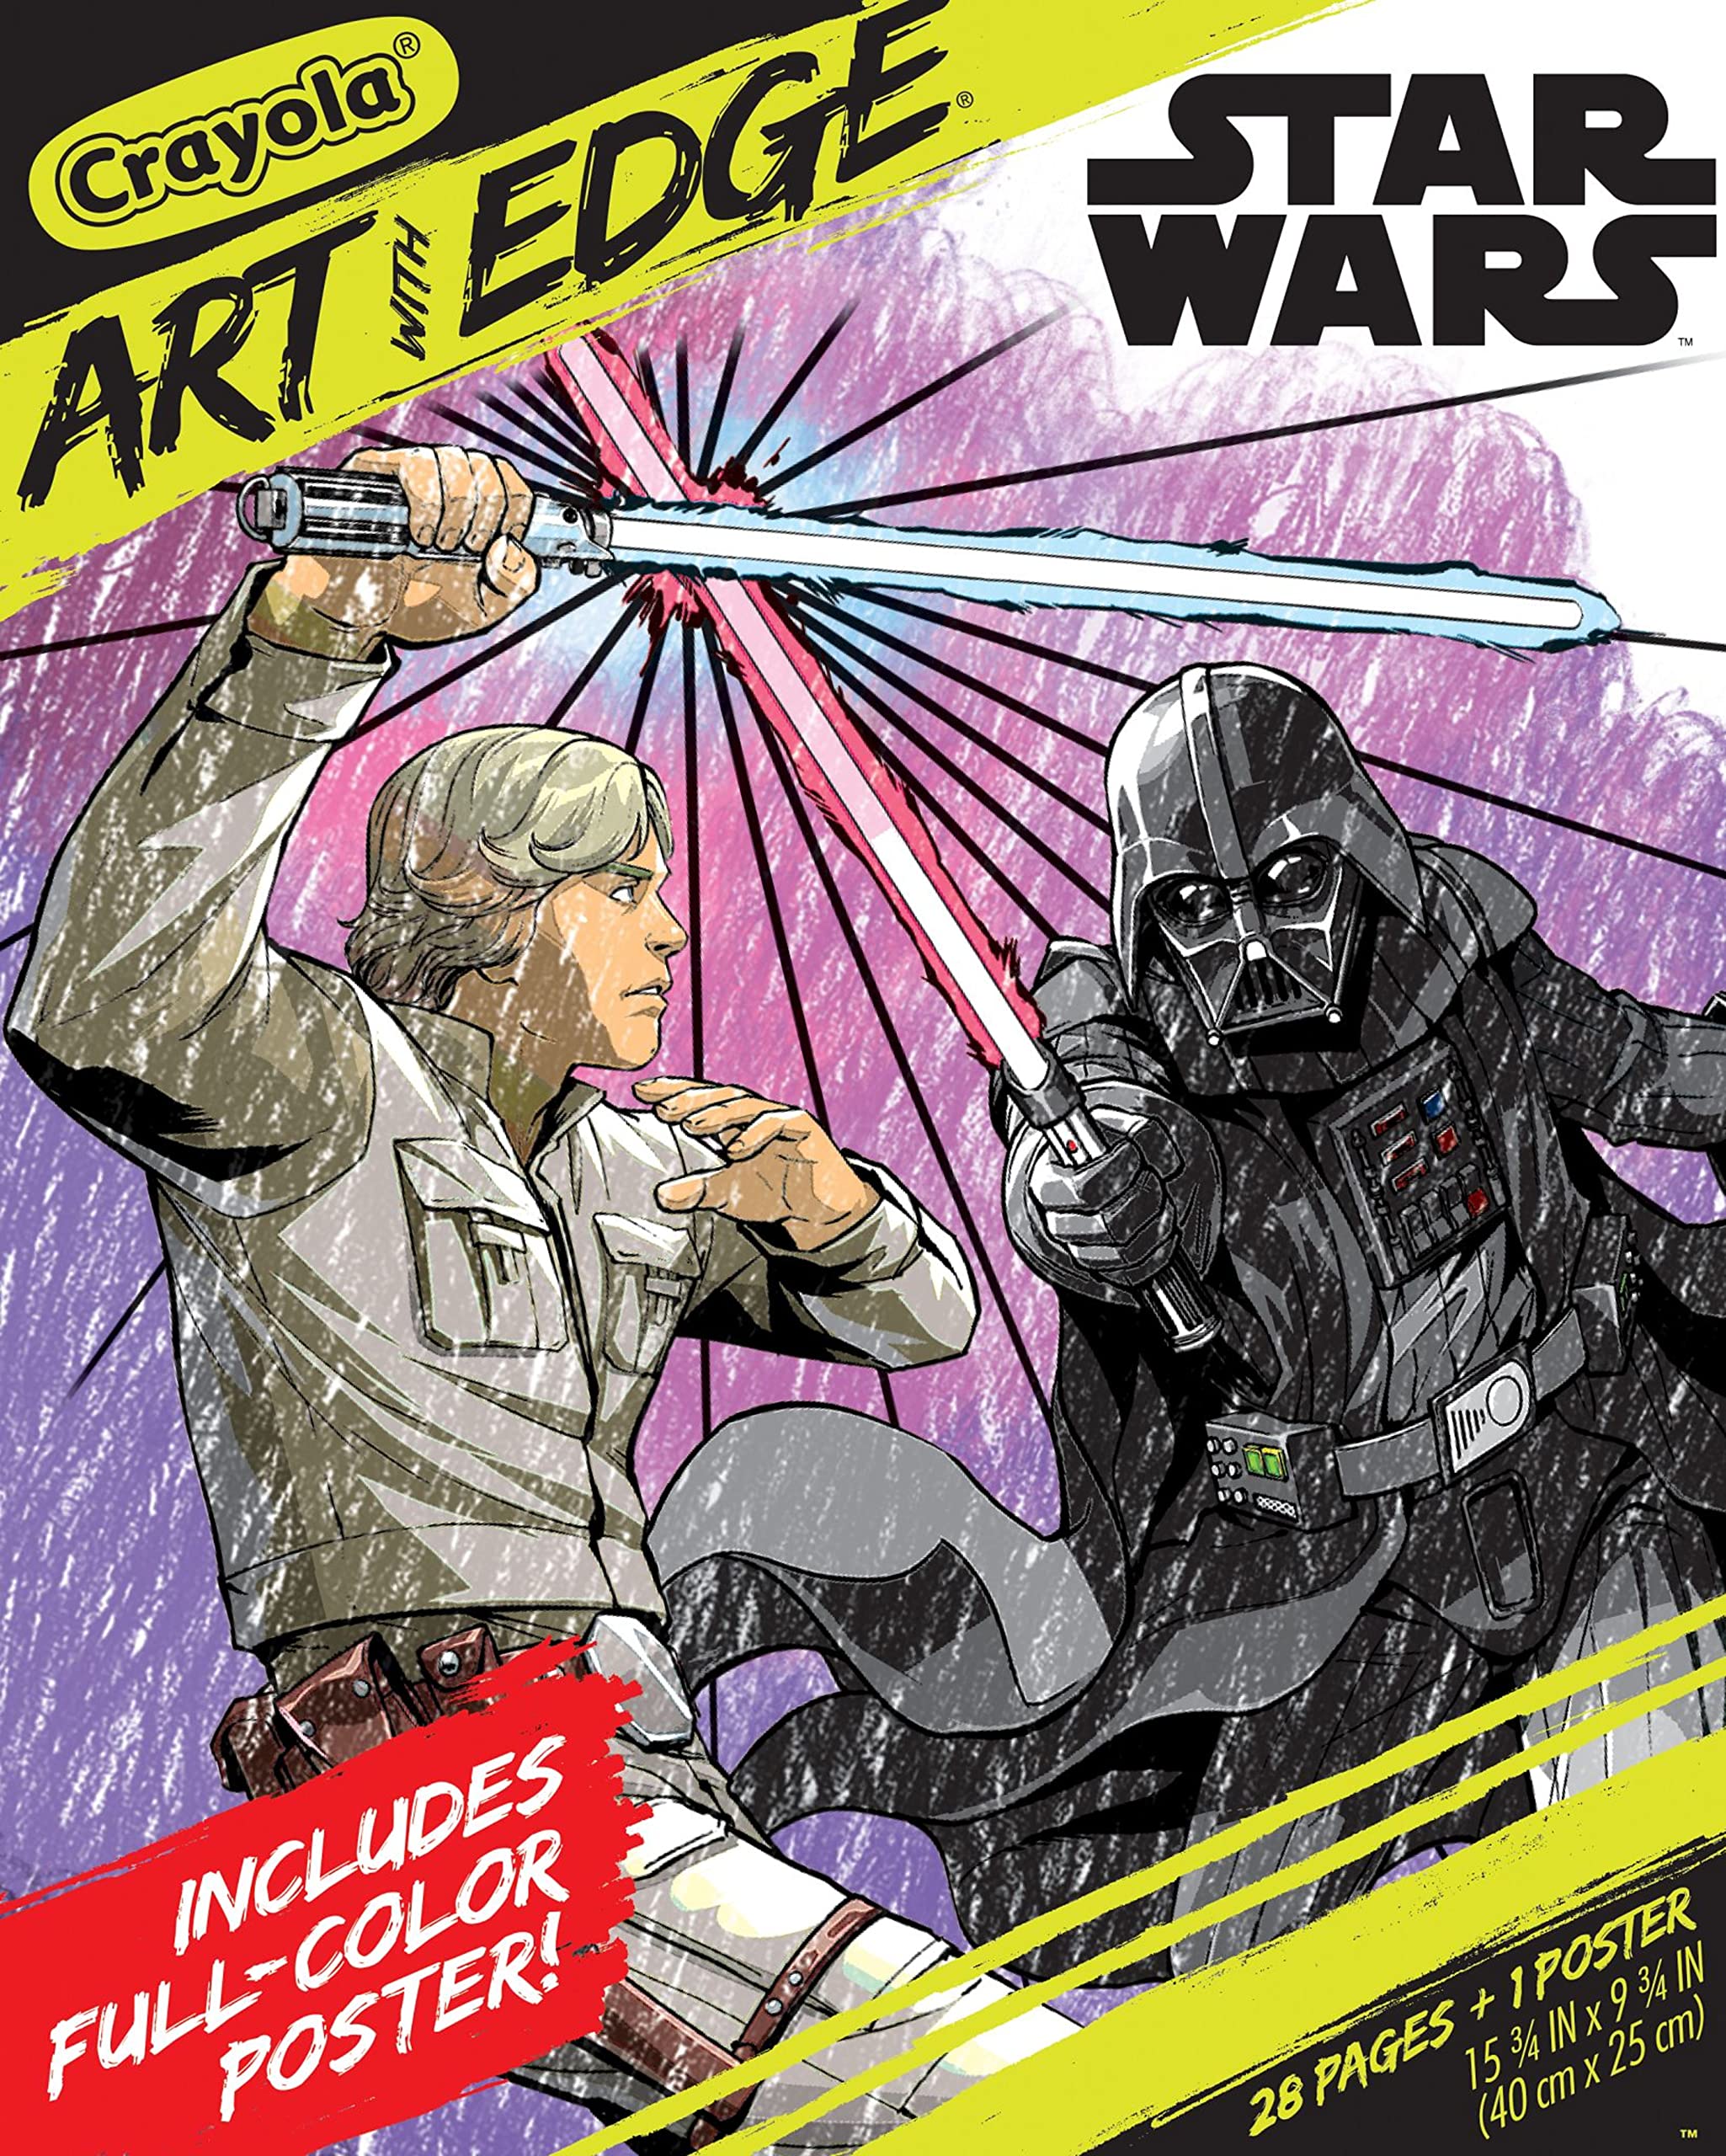 Crayola art with edge star wars coloring pages pgs includes star wars poster adult coloring gift for teens adults toys games